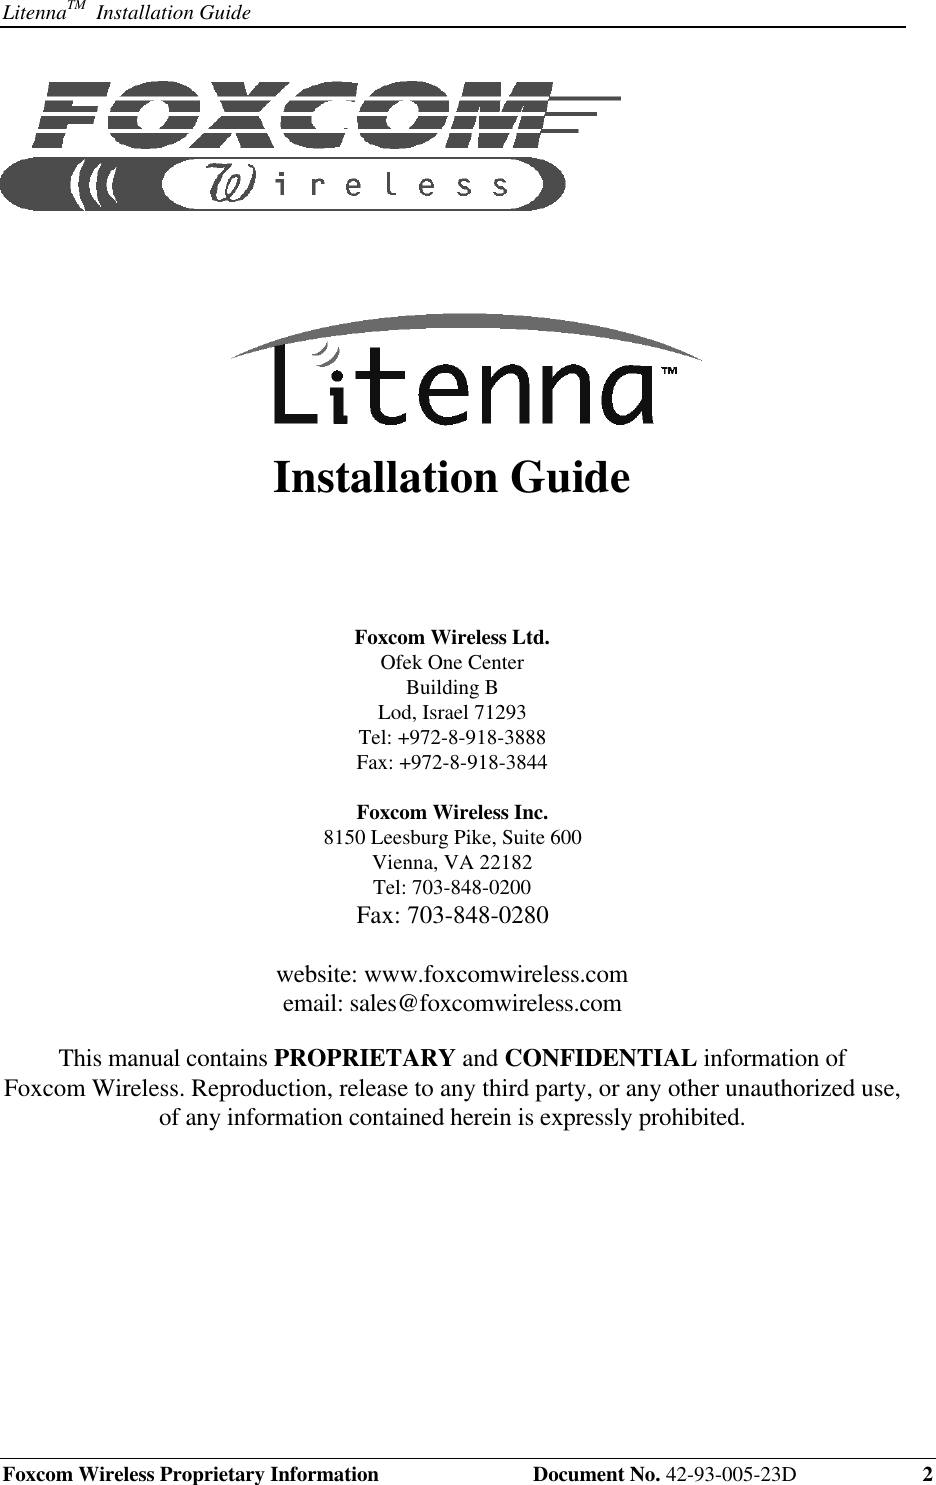 LitennaTM  Installation GuideFoxcom Wireless Proprietary Information  Document No. 42-93-005-23D 2Installation GuideFoxcom Wireless Ltd.   Ofek One CenterBuilding BLod, Israel 71293Tel: +972-8-918-3888Fax: +972-8-918-3844Foxcom Wireless Inc.8150 Leesburg Pike, Suite 600Vienna, VA 22182Tel: 703-848-0200Fax: 703-848-0280website: www.foxcomwireless.comemail: sales@foxcomwireless.comThis manual contains PROPRIETARY and CONFIDENTIAL information ofFoxcom Wireless. Reproduction, release to any third party, or any other unauthorized use,of any information contained herein is expressly prohibited. 